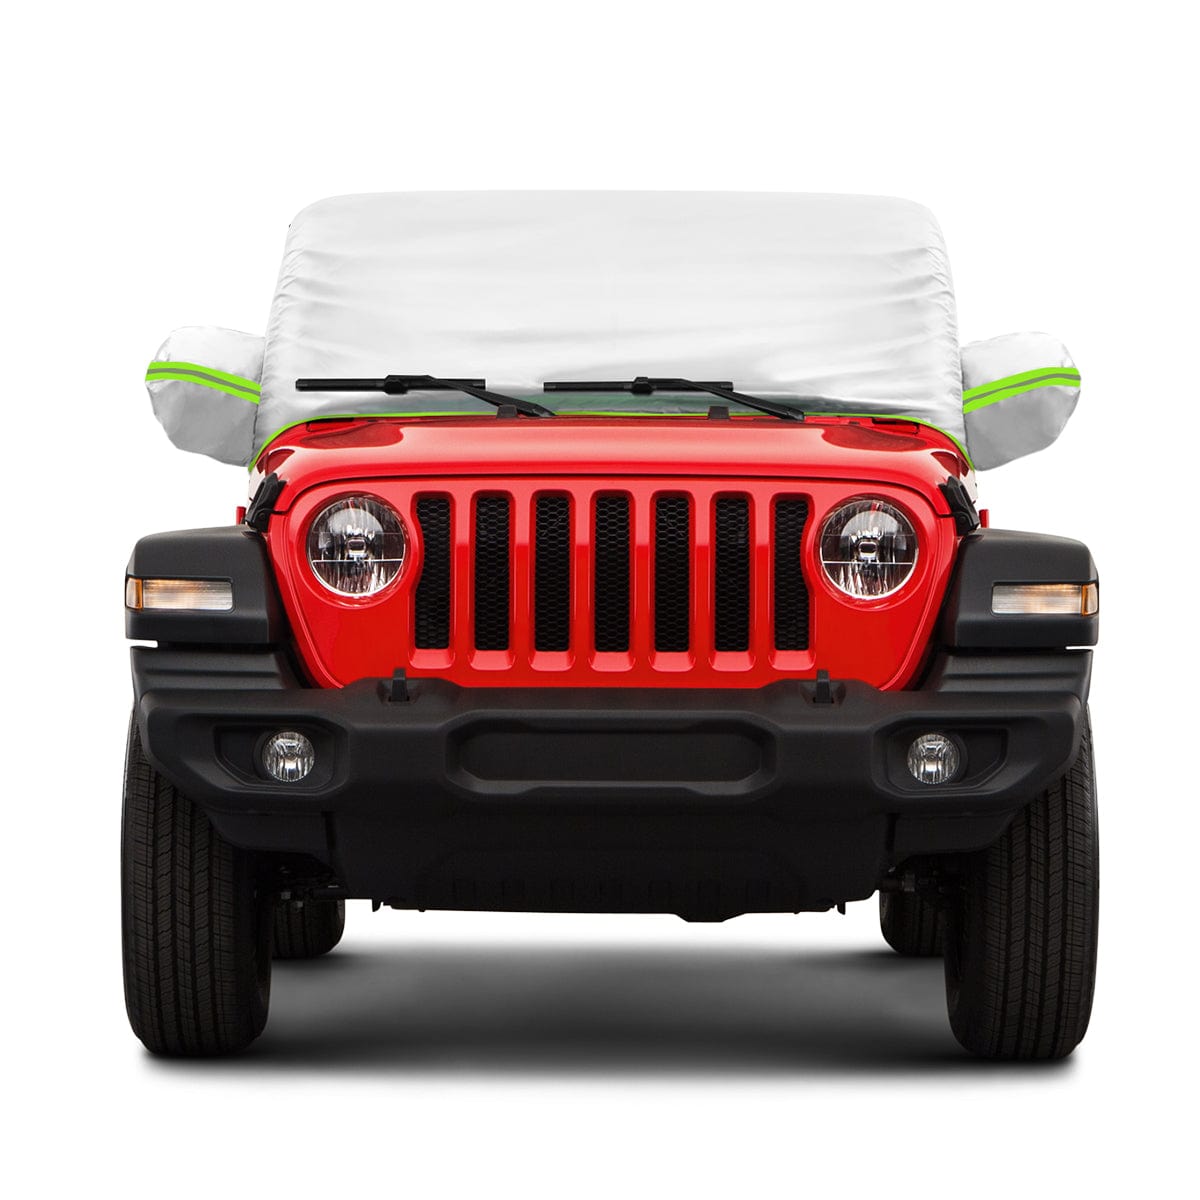 SUPAREE Jeep Cover Suparee Jeep Cab Cover Upgraded for 2007-2023 Wrangler JK JL 4 Door Product description